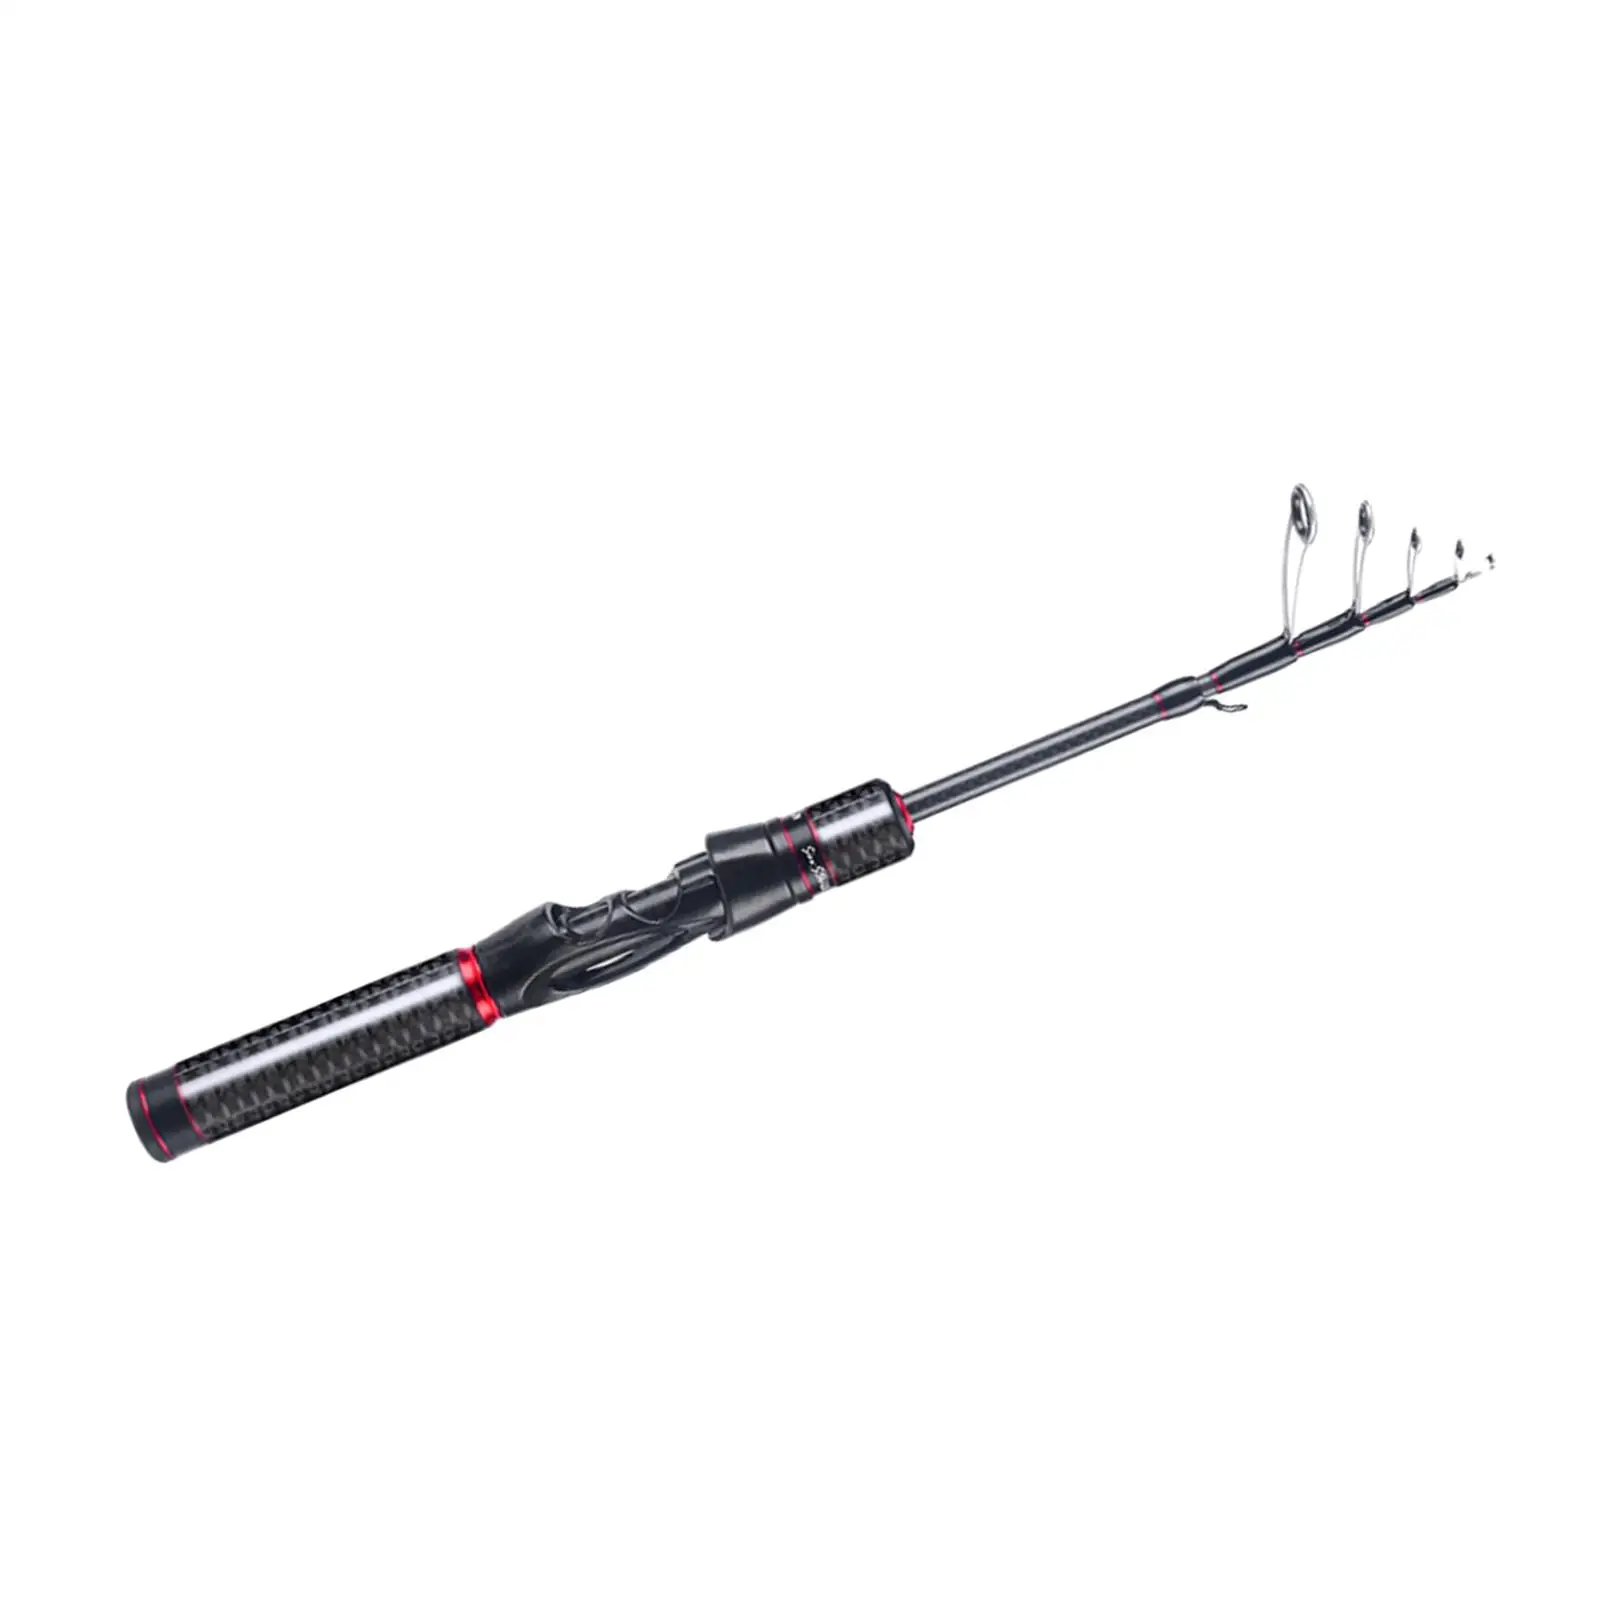 Carbon Fiber Fishing Rod Telescopic Fishing Pole Ceramic Guides Retractable Handle Fishing Tool for Bass Walleye Trout Salmon